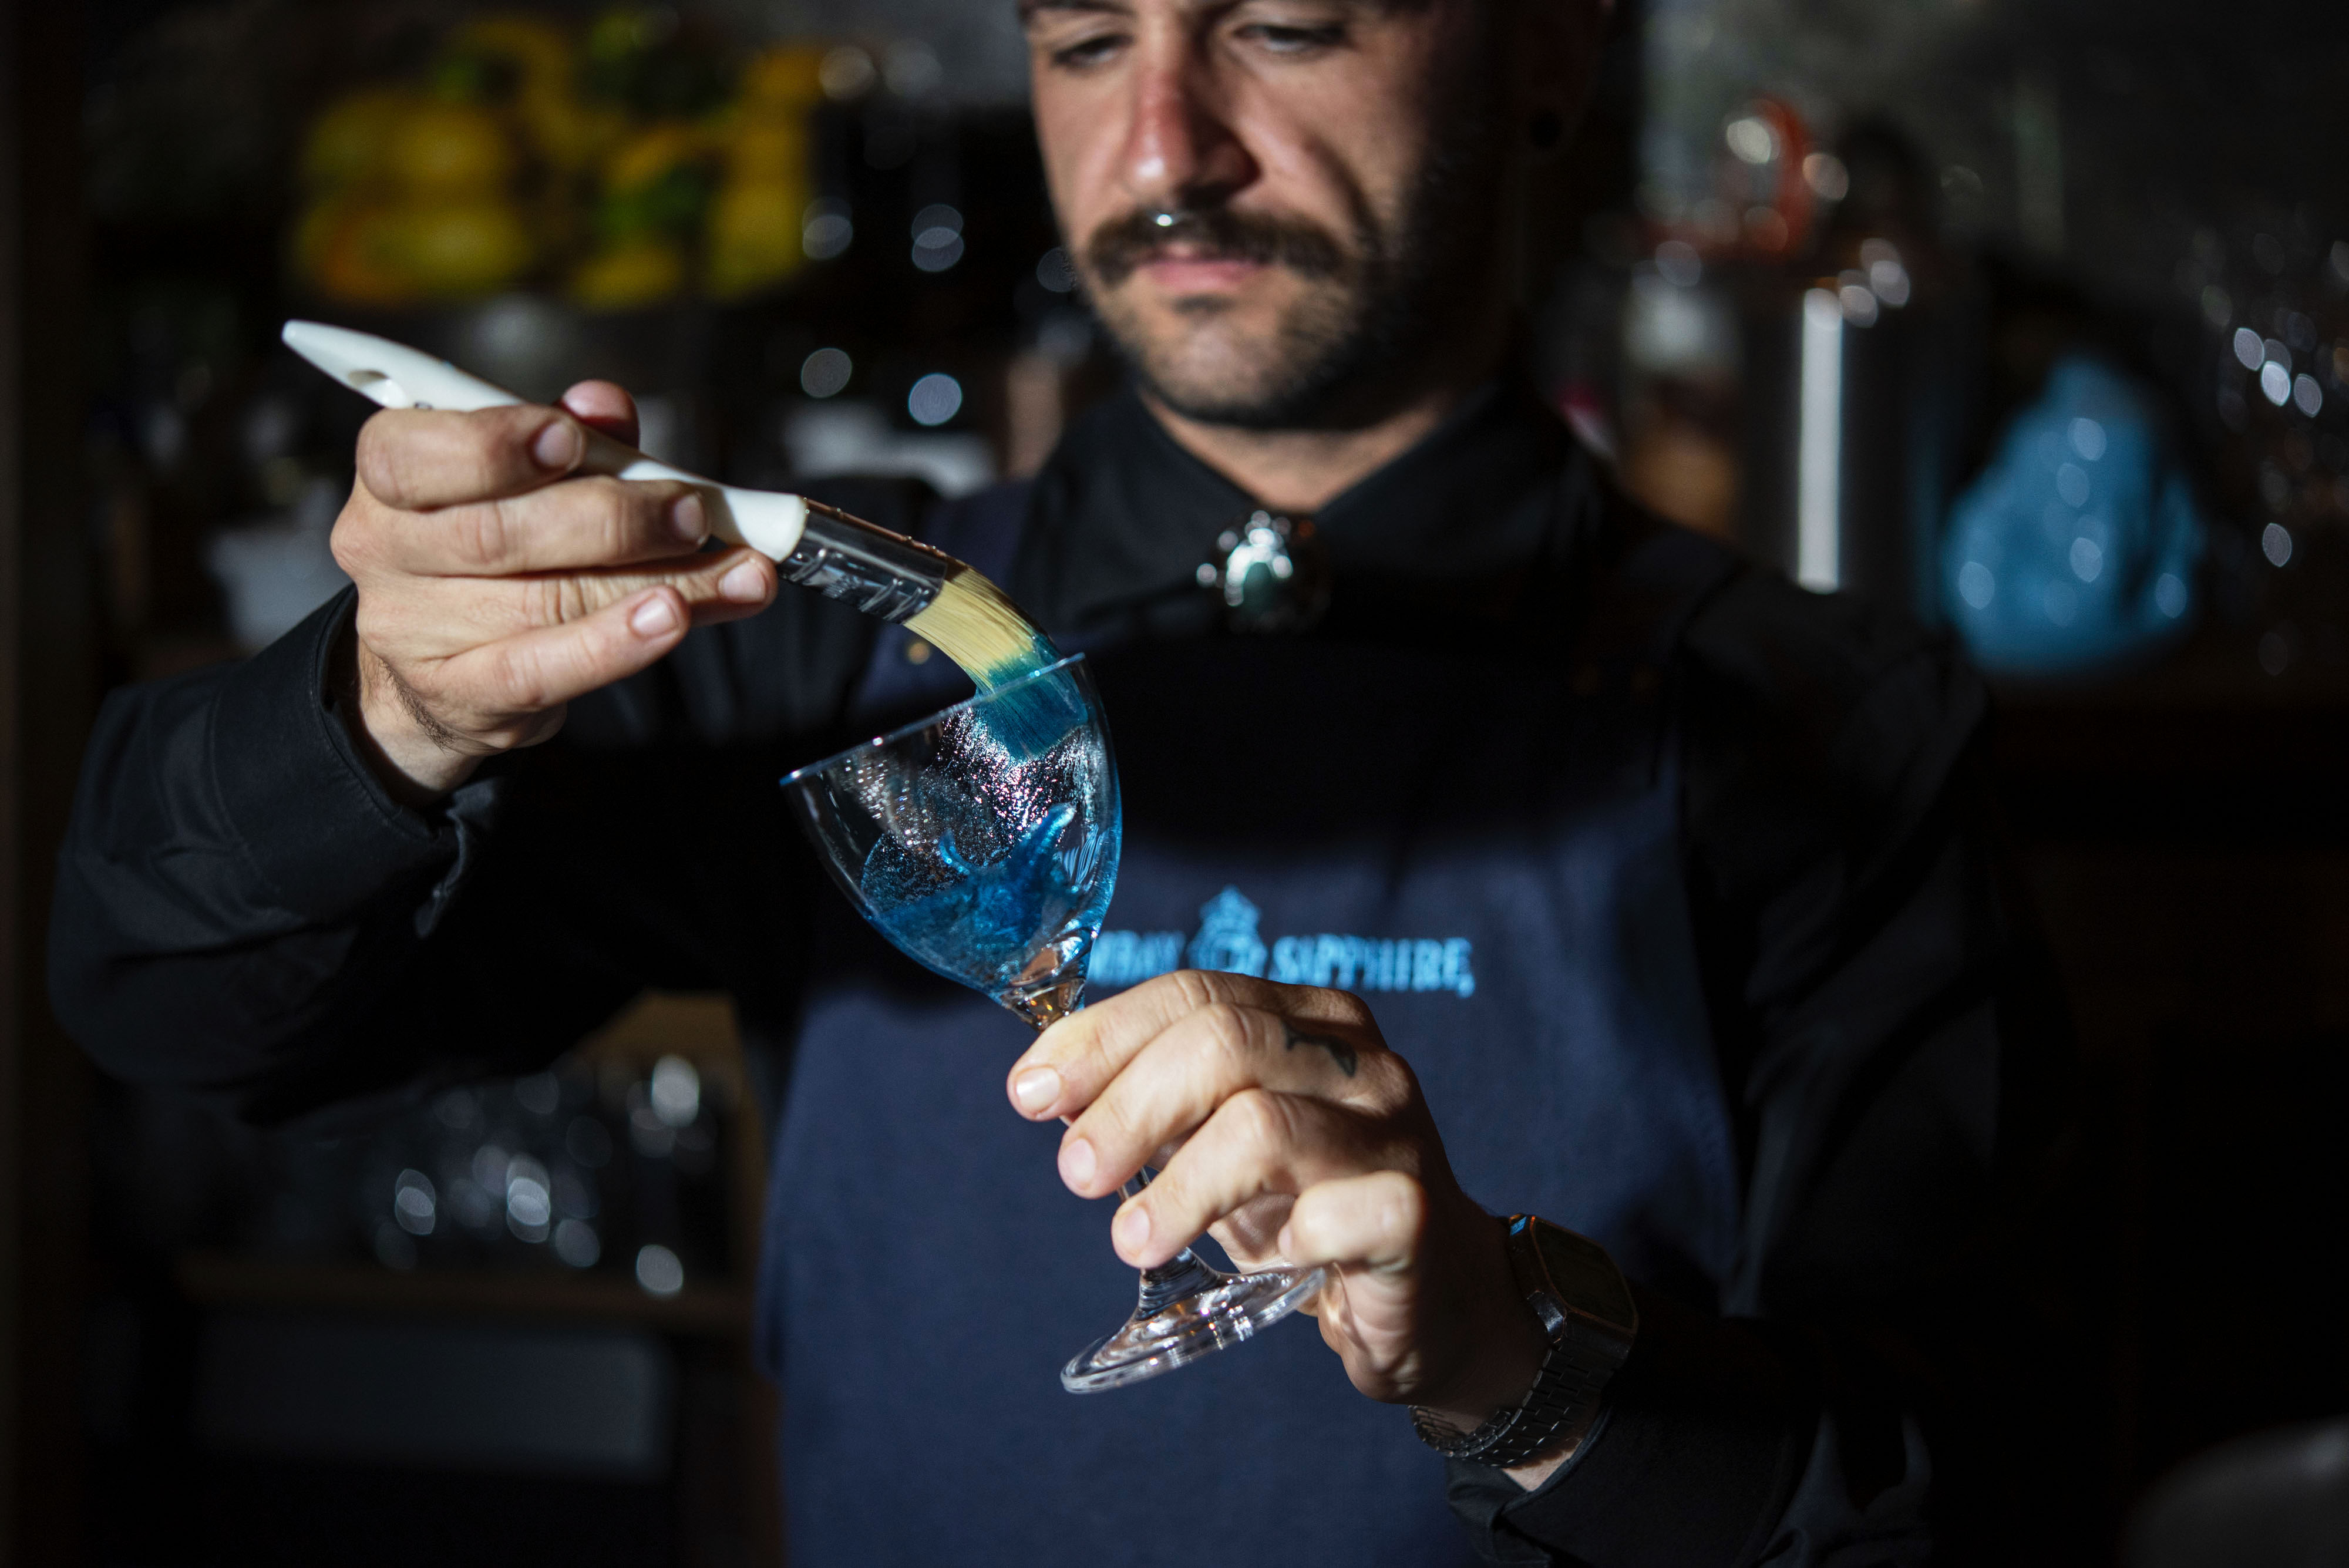 Alan Walsh X Bombay Sapphire art exhibition at The Barber Shop